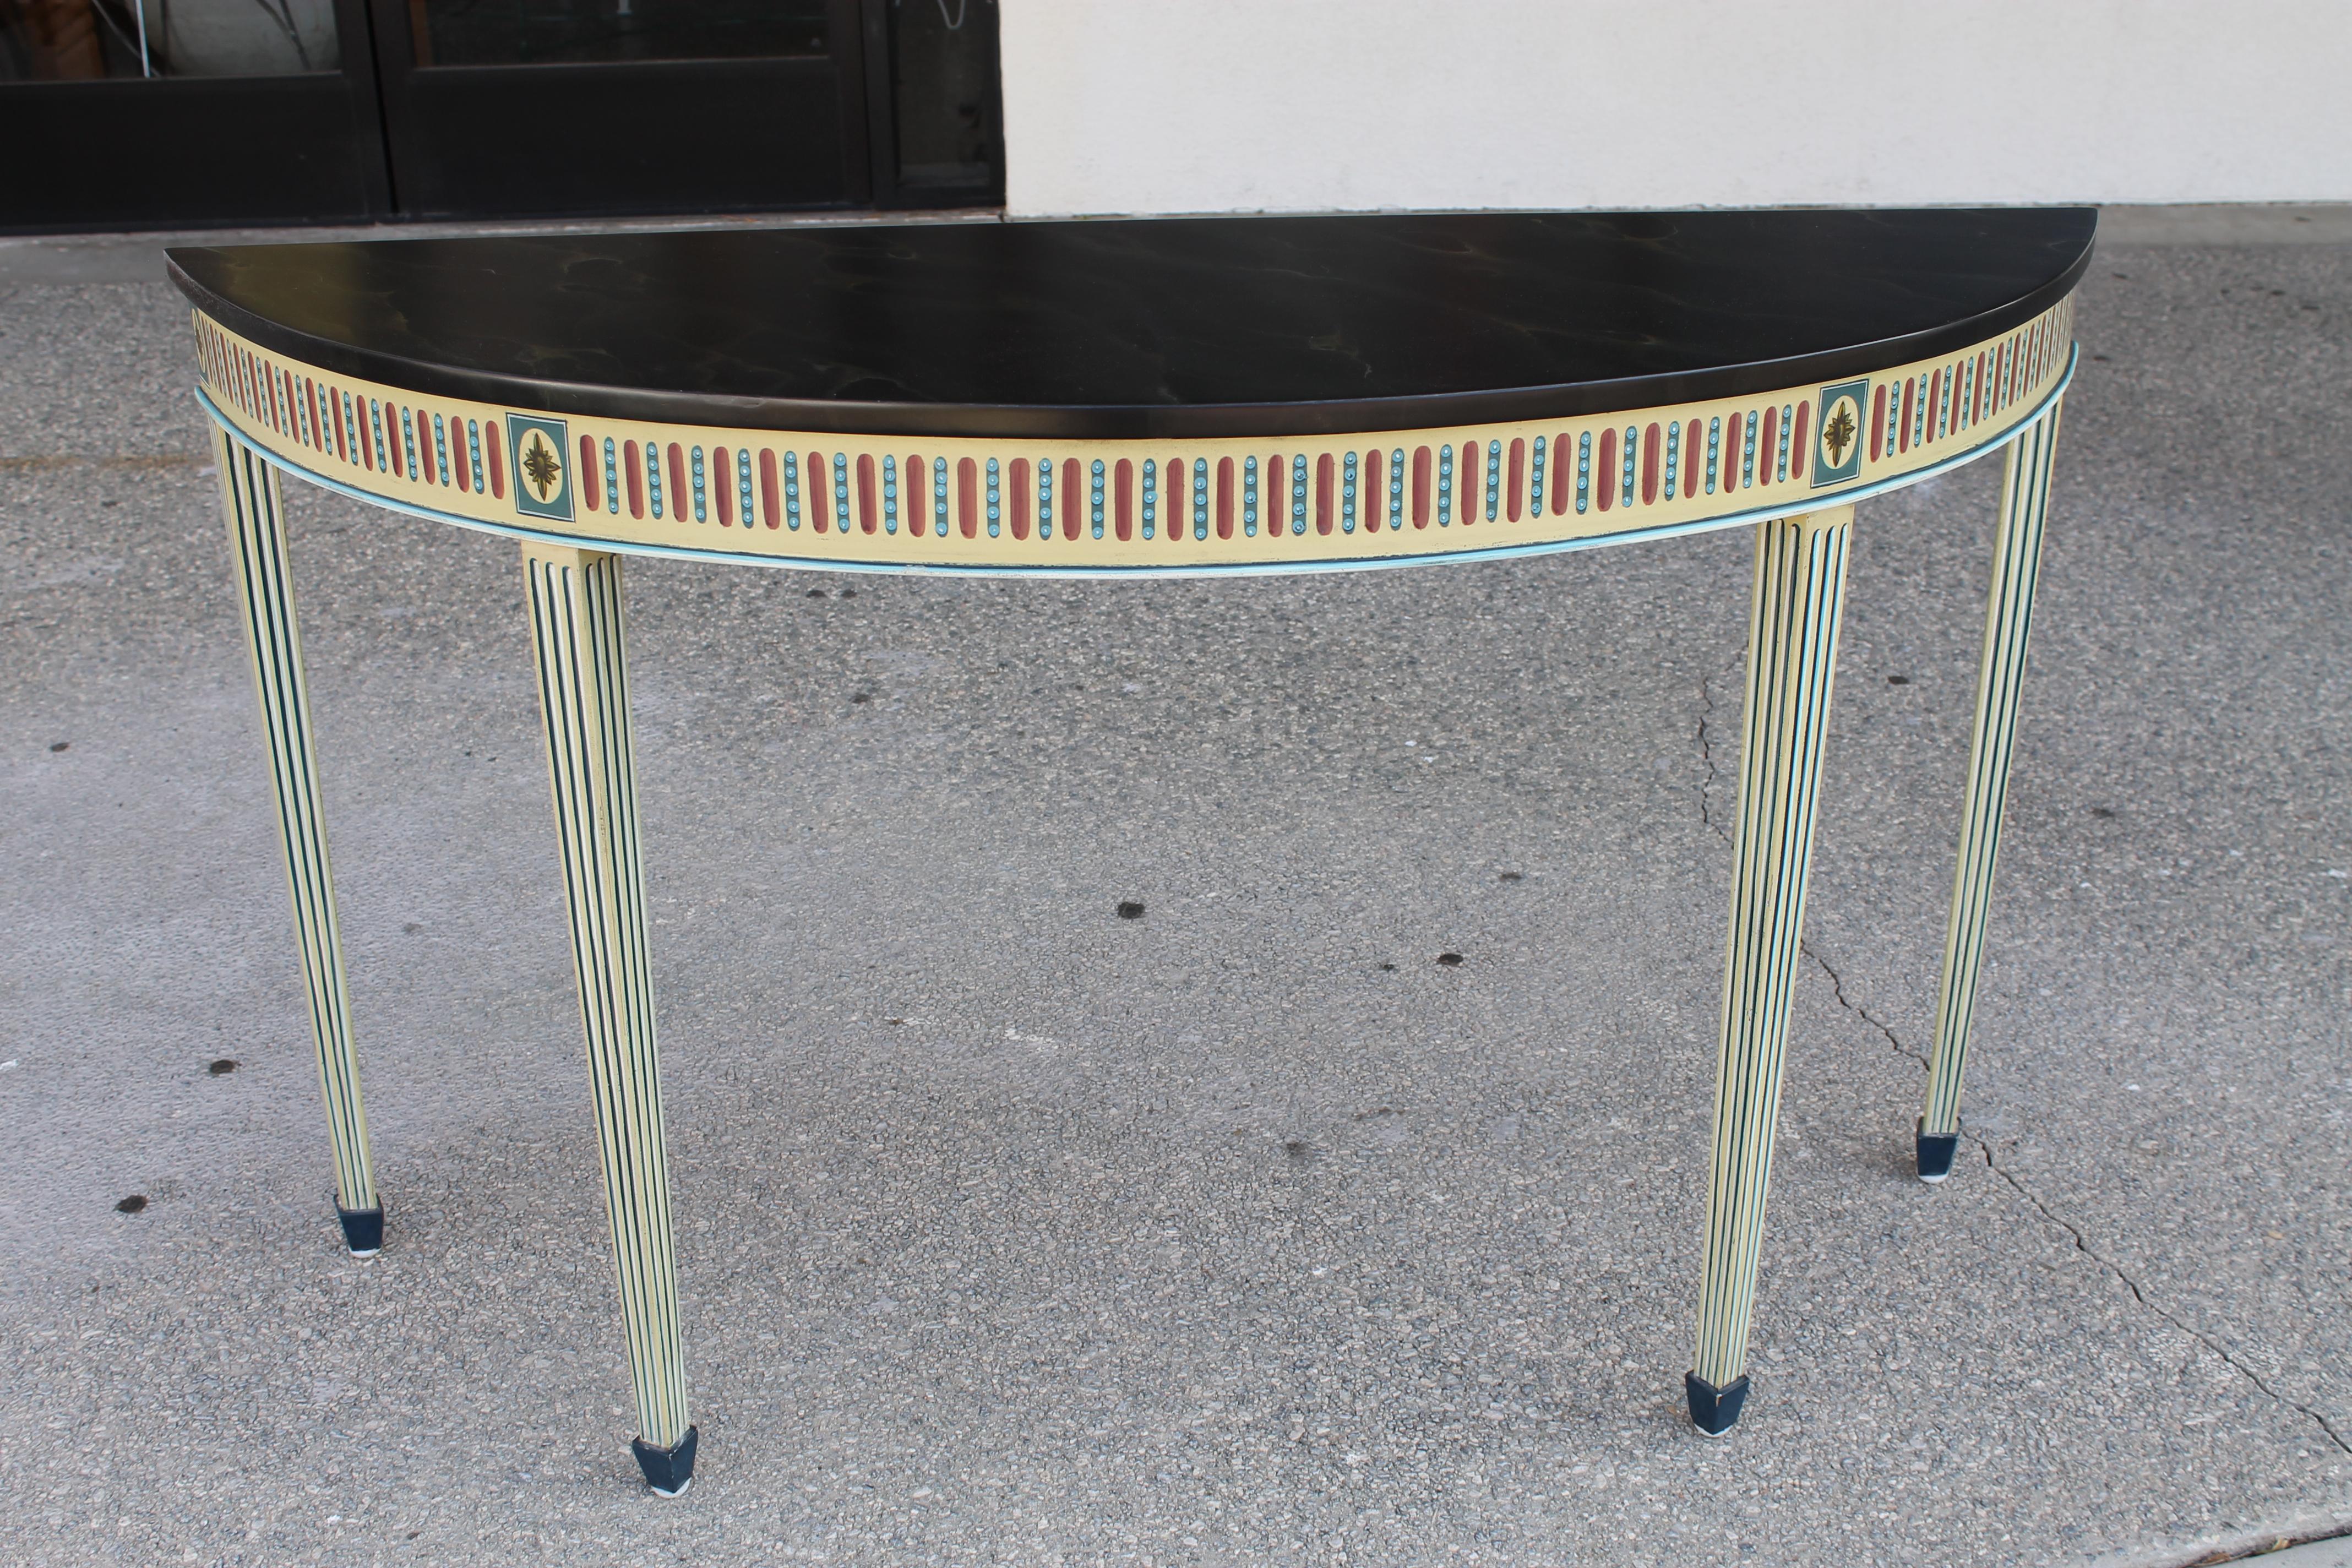 A pair of Maitland Smith neoclassical style console tables, each having a demi-lune top, above polychrome decorated tapered legs. The tops have a hand painted faux finish with clear lacquer.  Underneath each table is signed HAND PAINTED Maitland